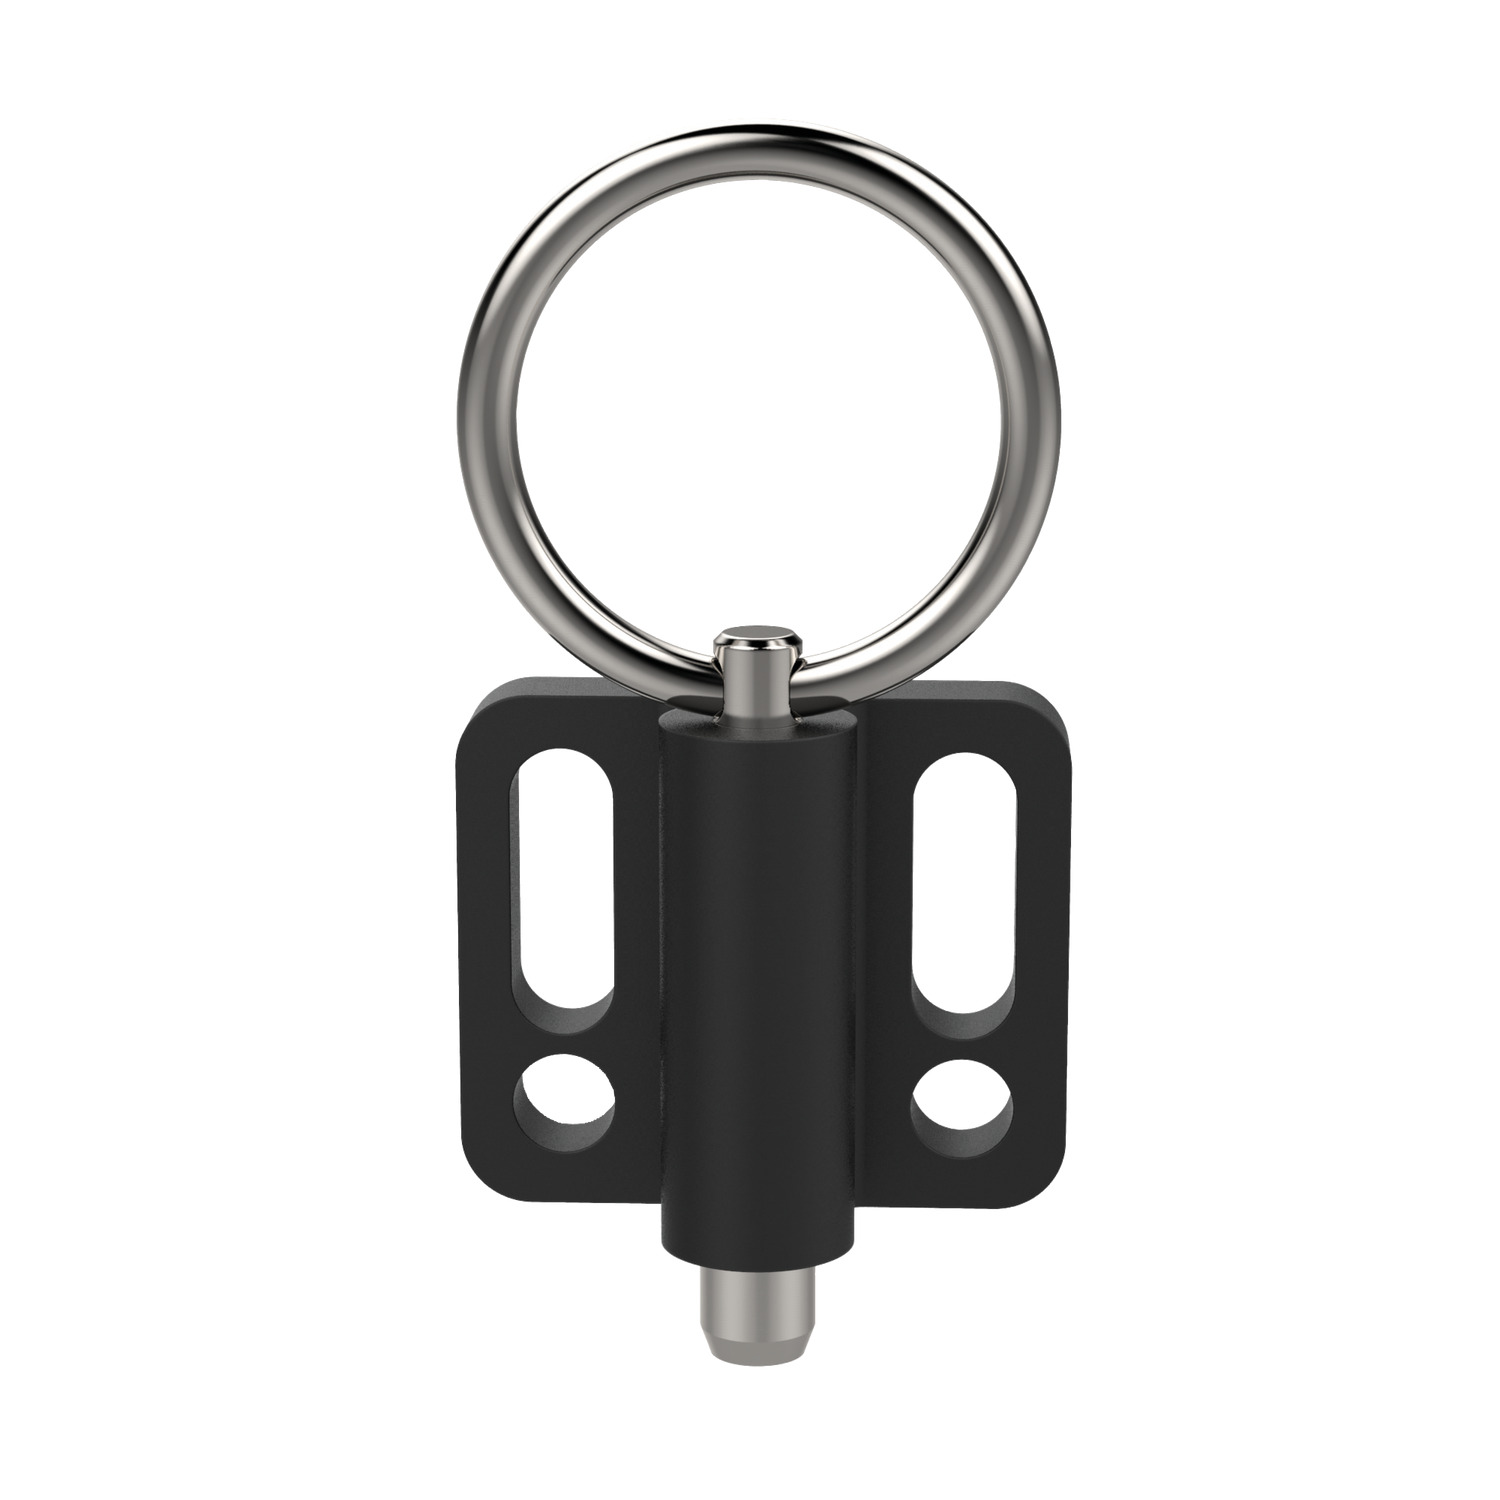 Index Plungers - Pull Grip & Pull Ring These index plungers are ideal for quick and simple manual indexing purposes.